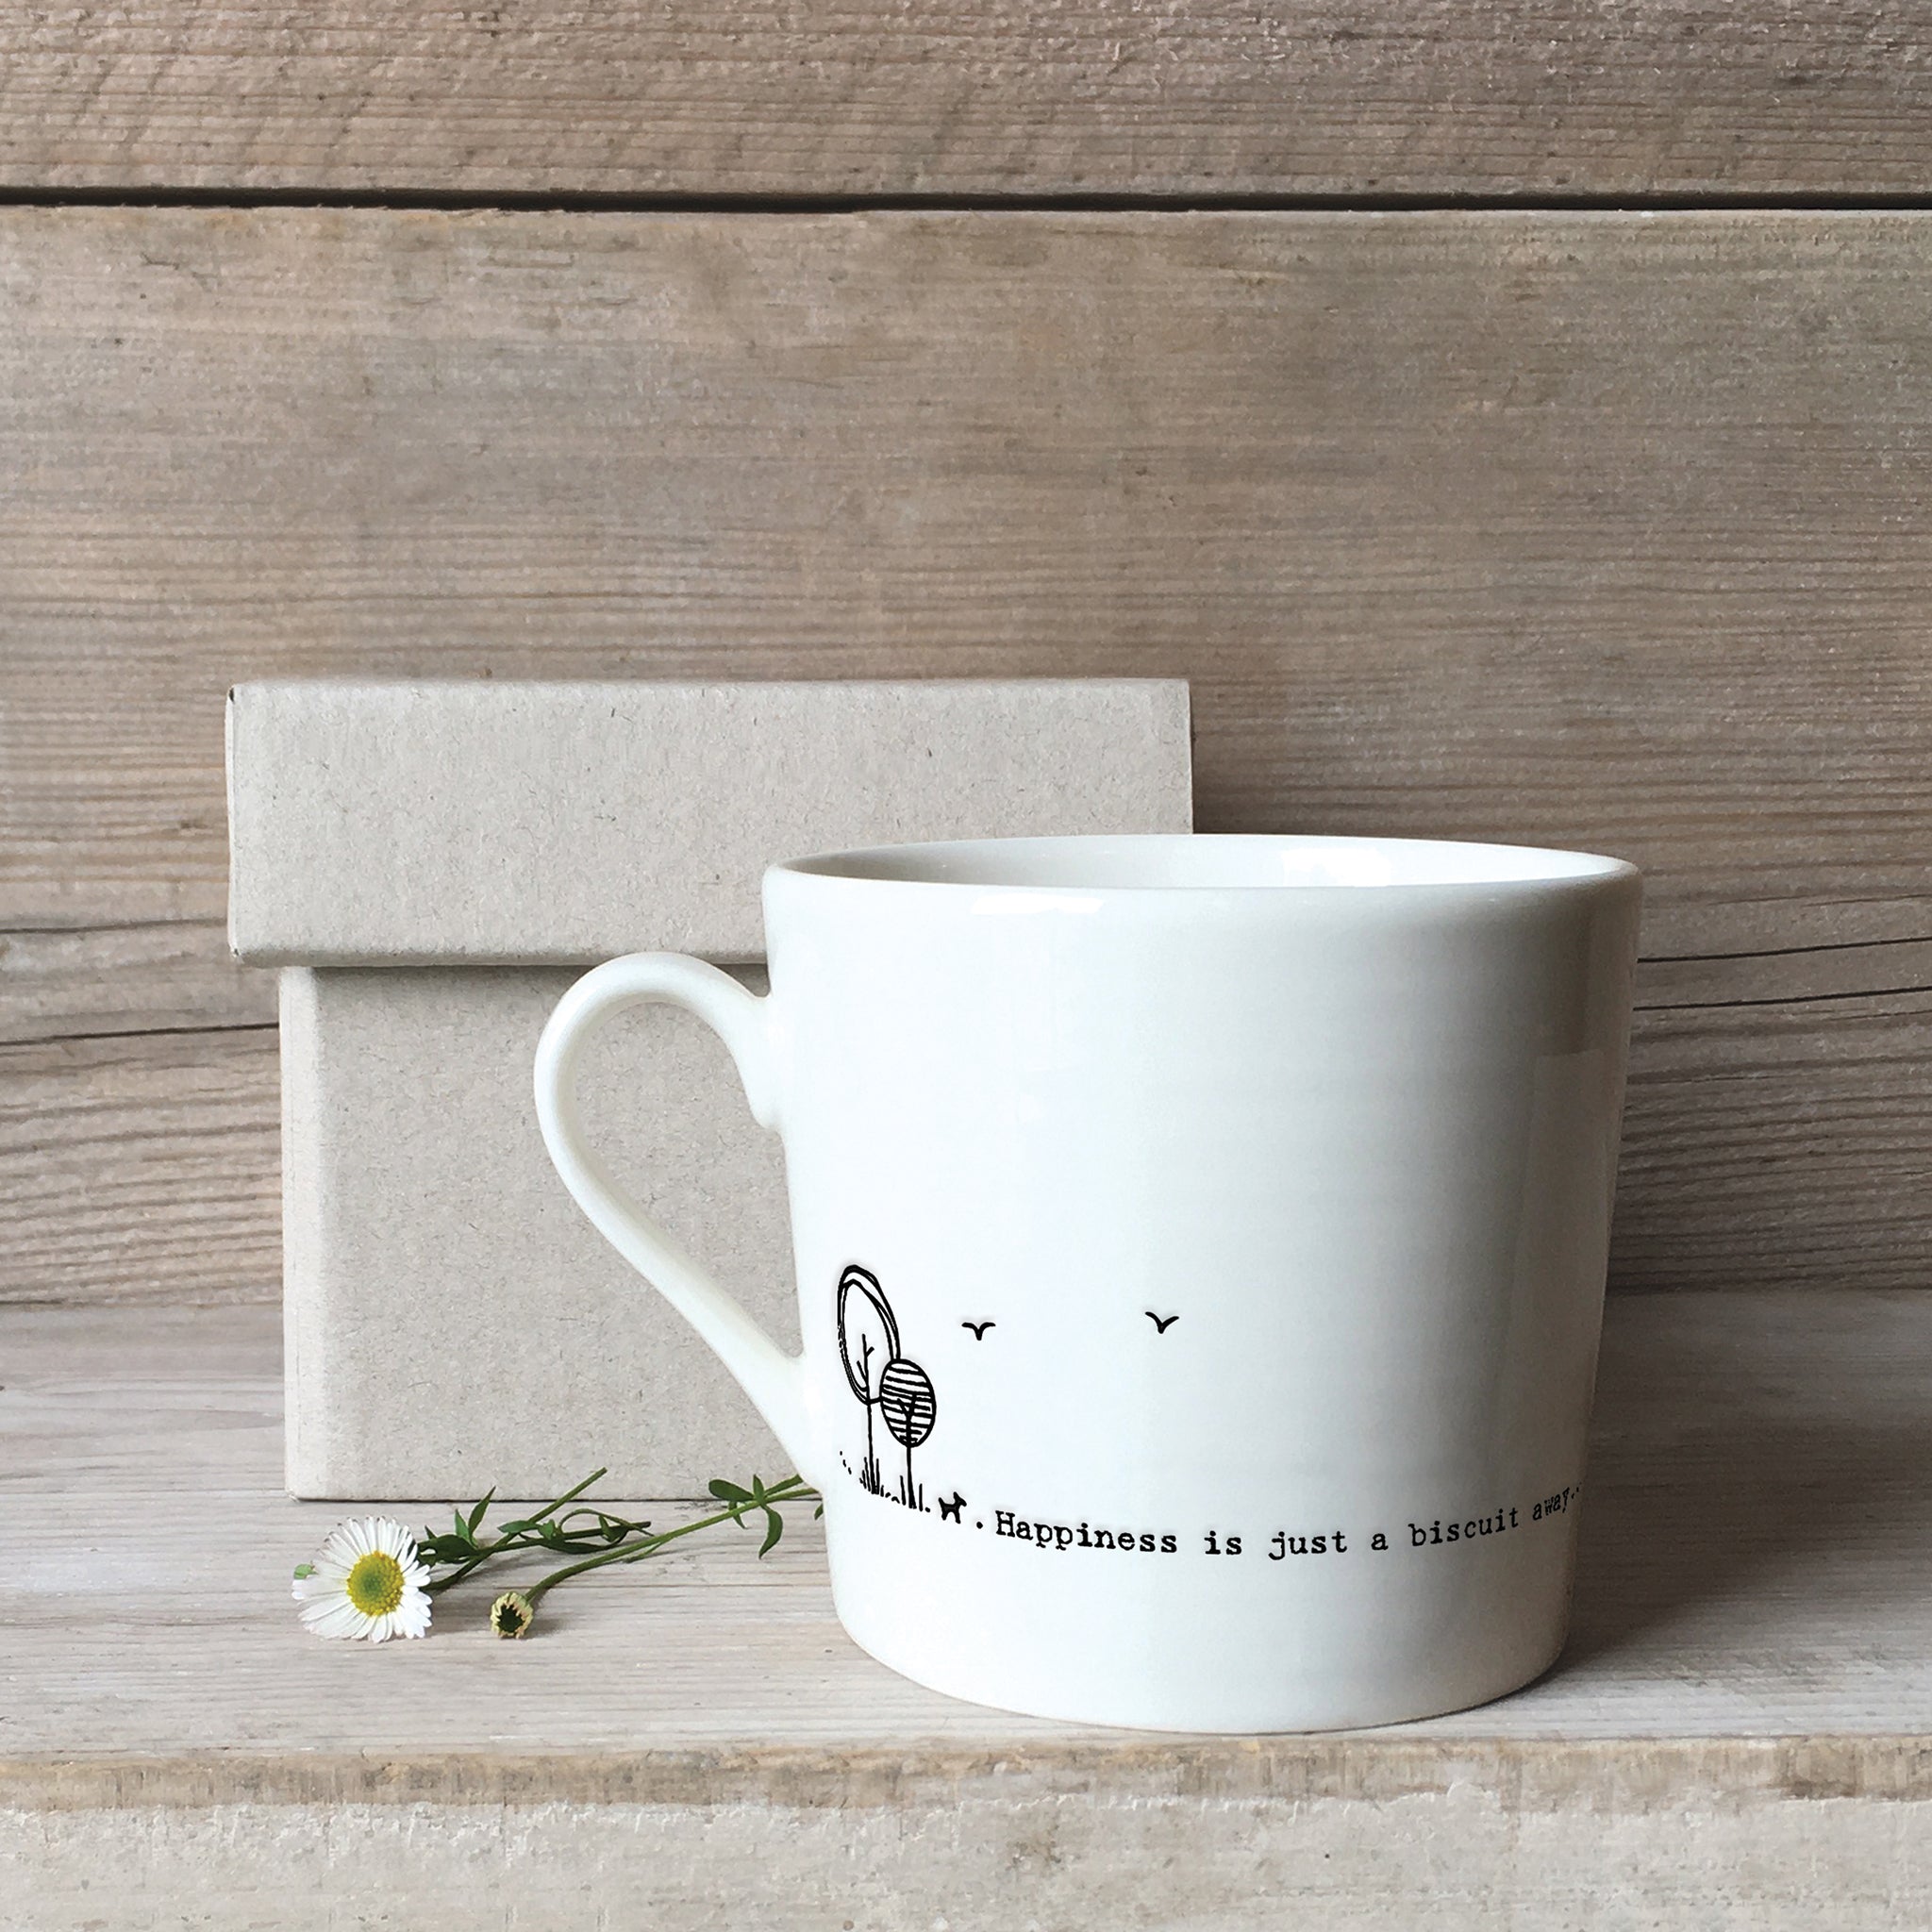 A white ceramic mug with a dog illustration and a quote with a box